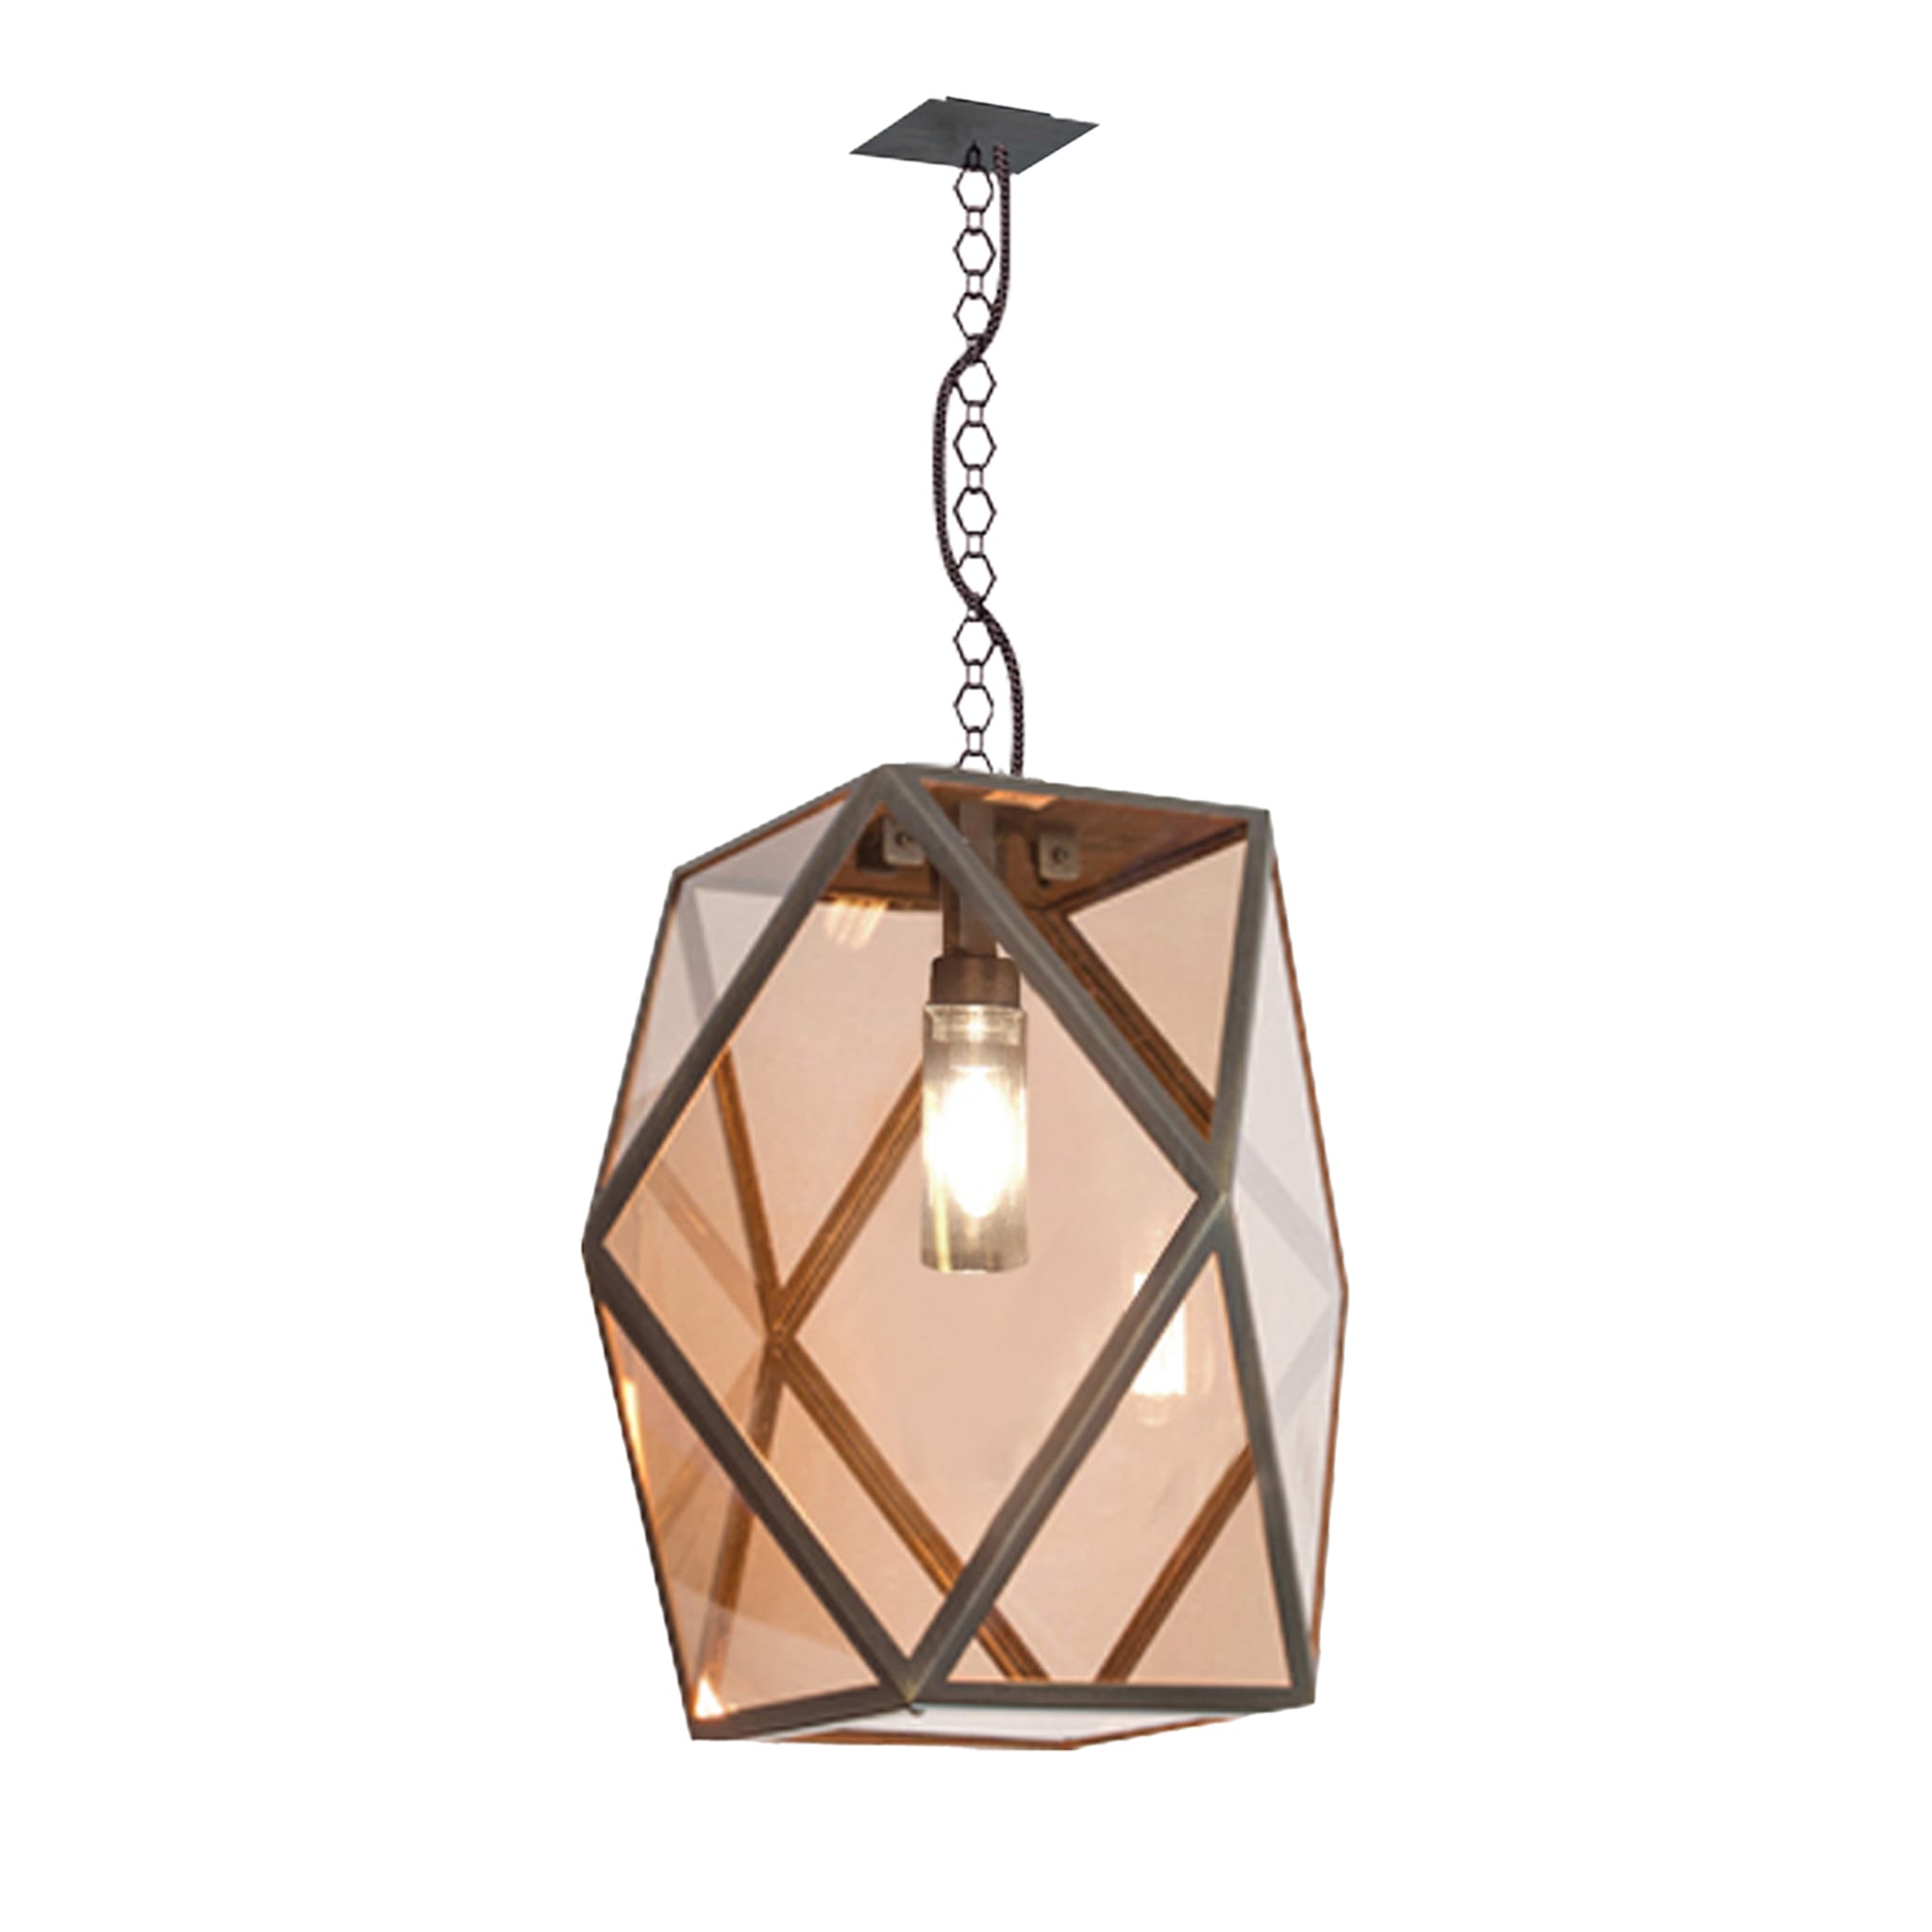 Muse Medium Bronze Outdoor Pendant Lamp by Tristan Auer - Main view